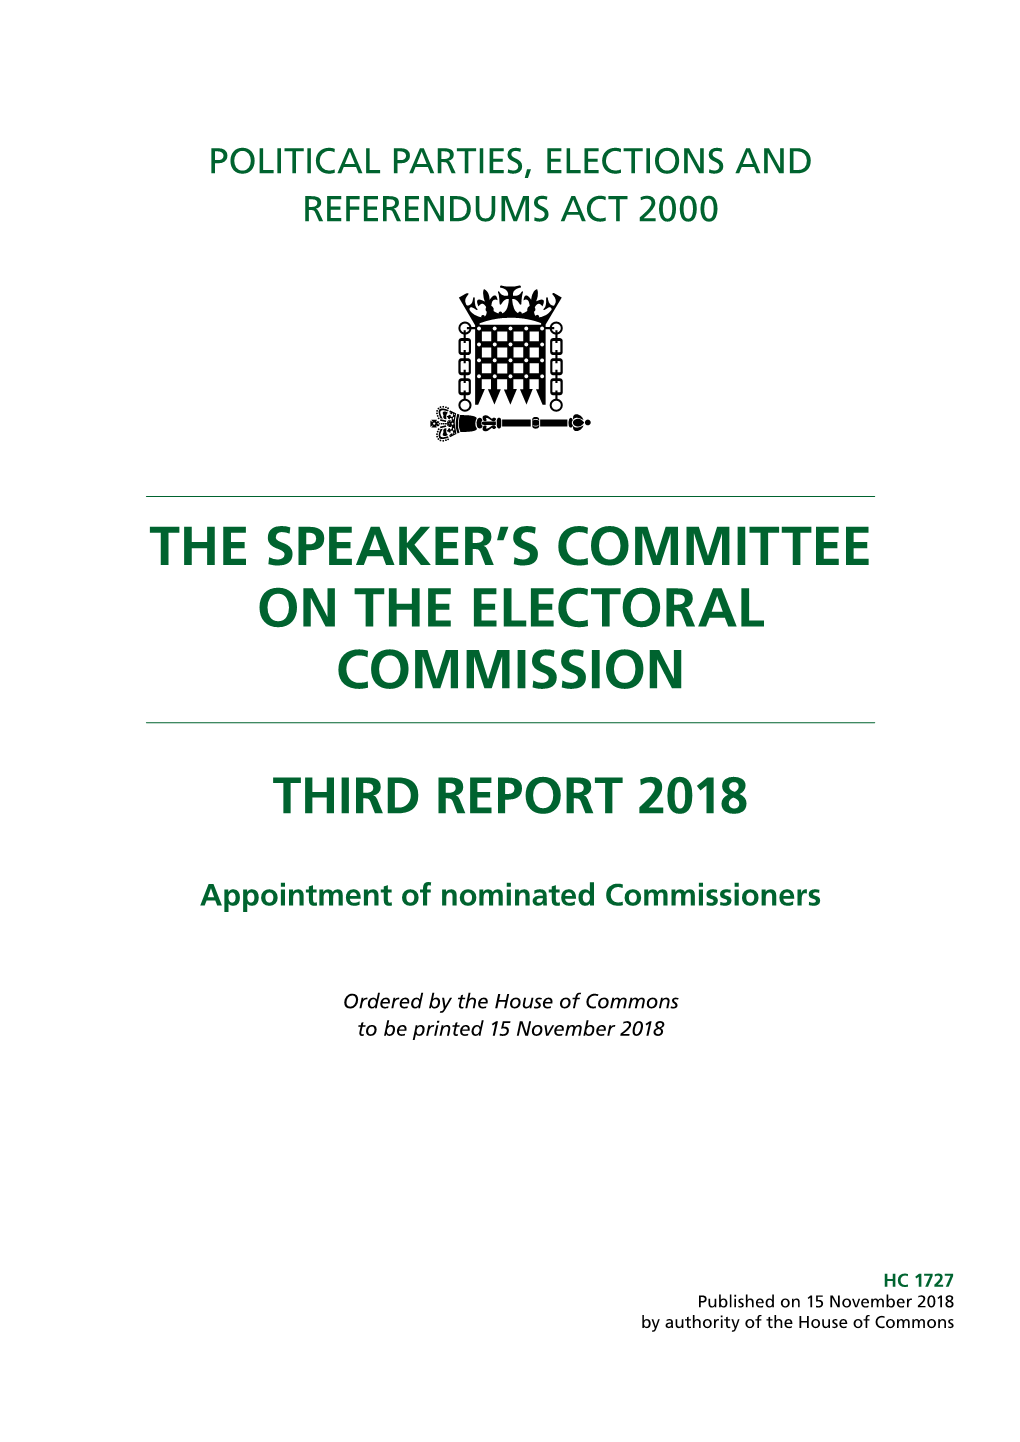 The Speaker's Committee on the Electoral Commission